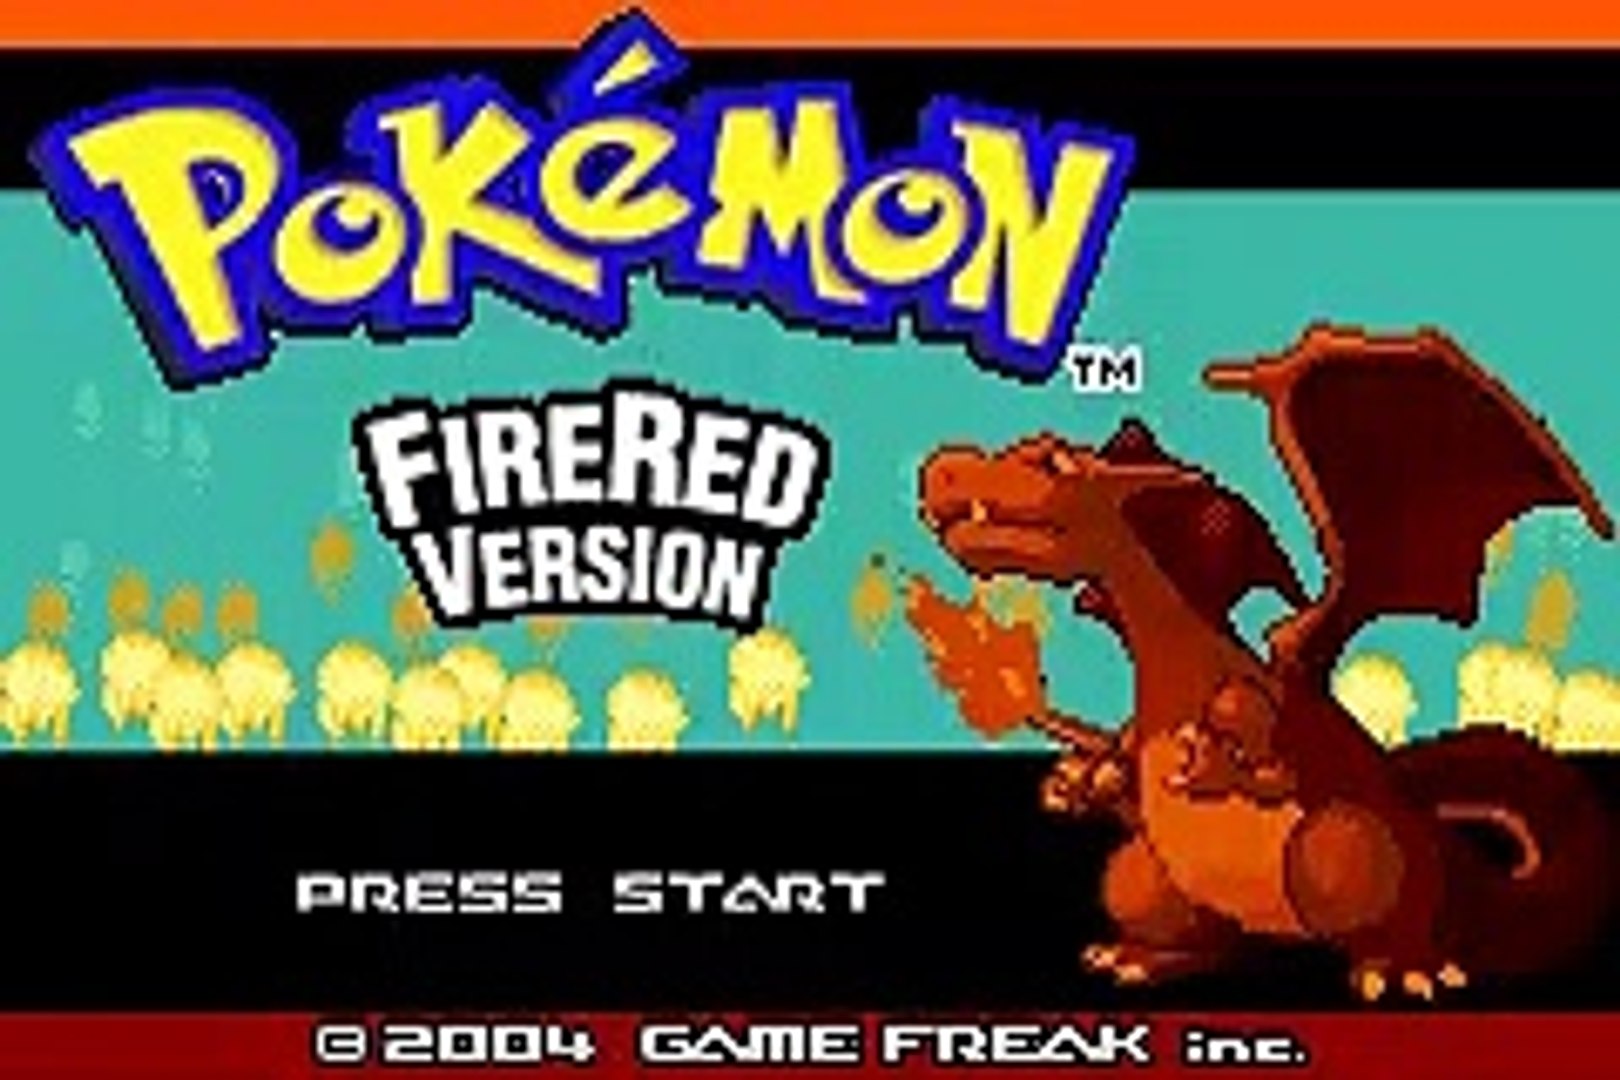 Pokemon Radical Red ROM Download - GameBoy Advance(GBA)